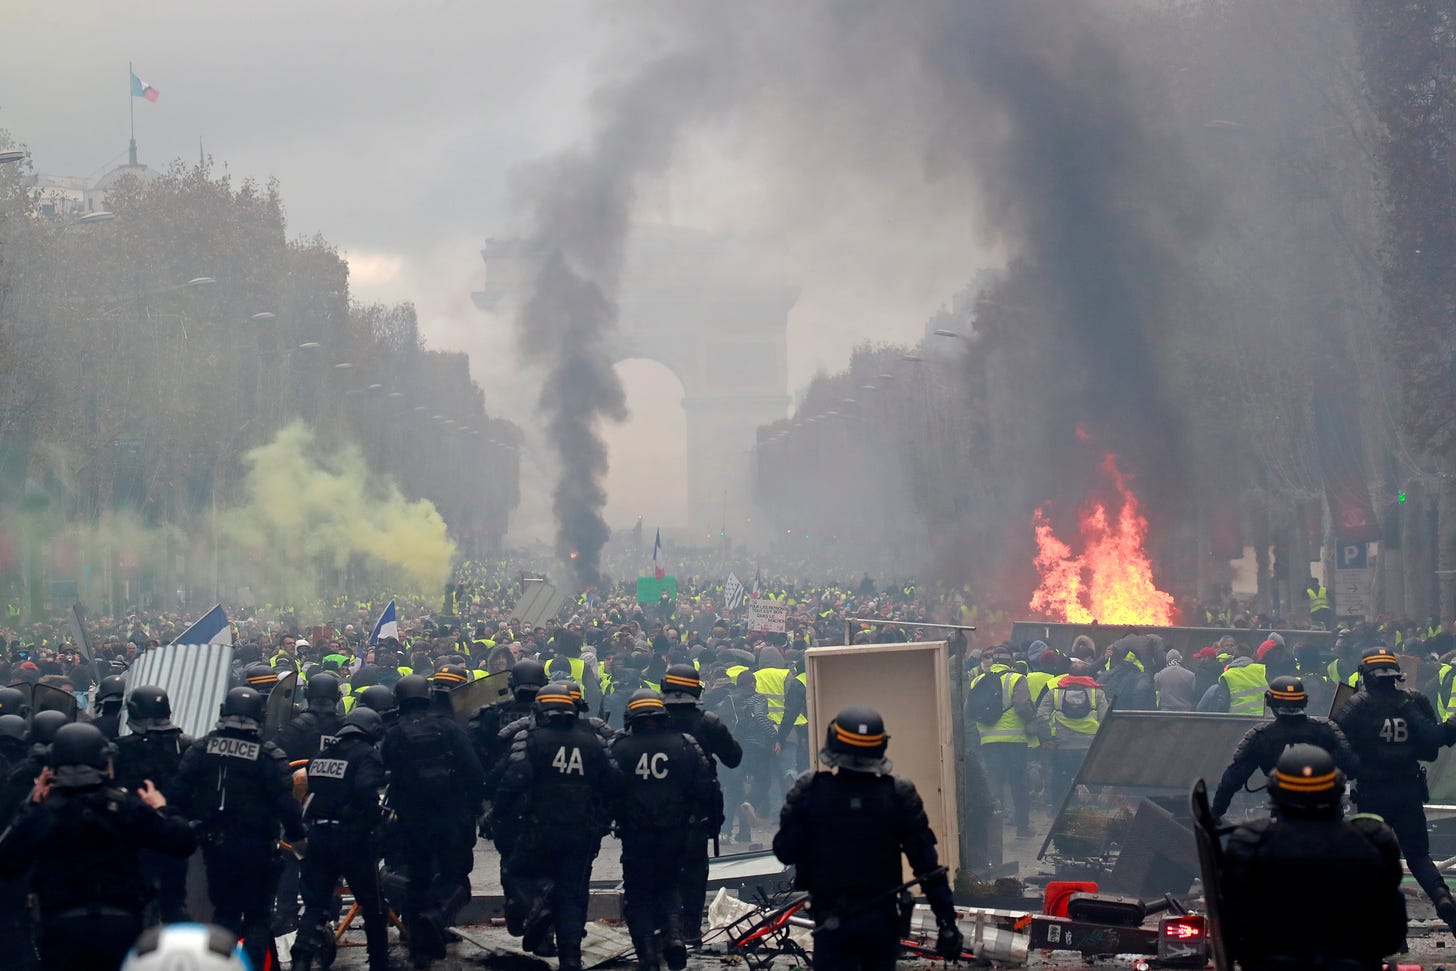 Protesters wearing yellow vests, a symbol of a French drivers' protest against higher fuel prices, run from police during riots on the Champs-Elysees in Paris, France, November 24, 2018. REUTERS/Gonzalo Fuentes